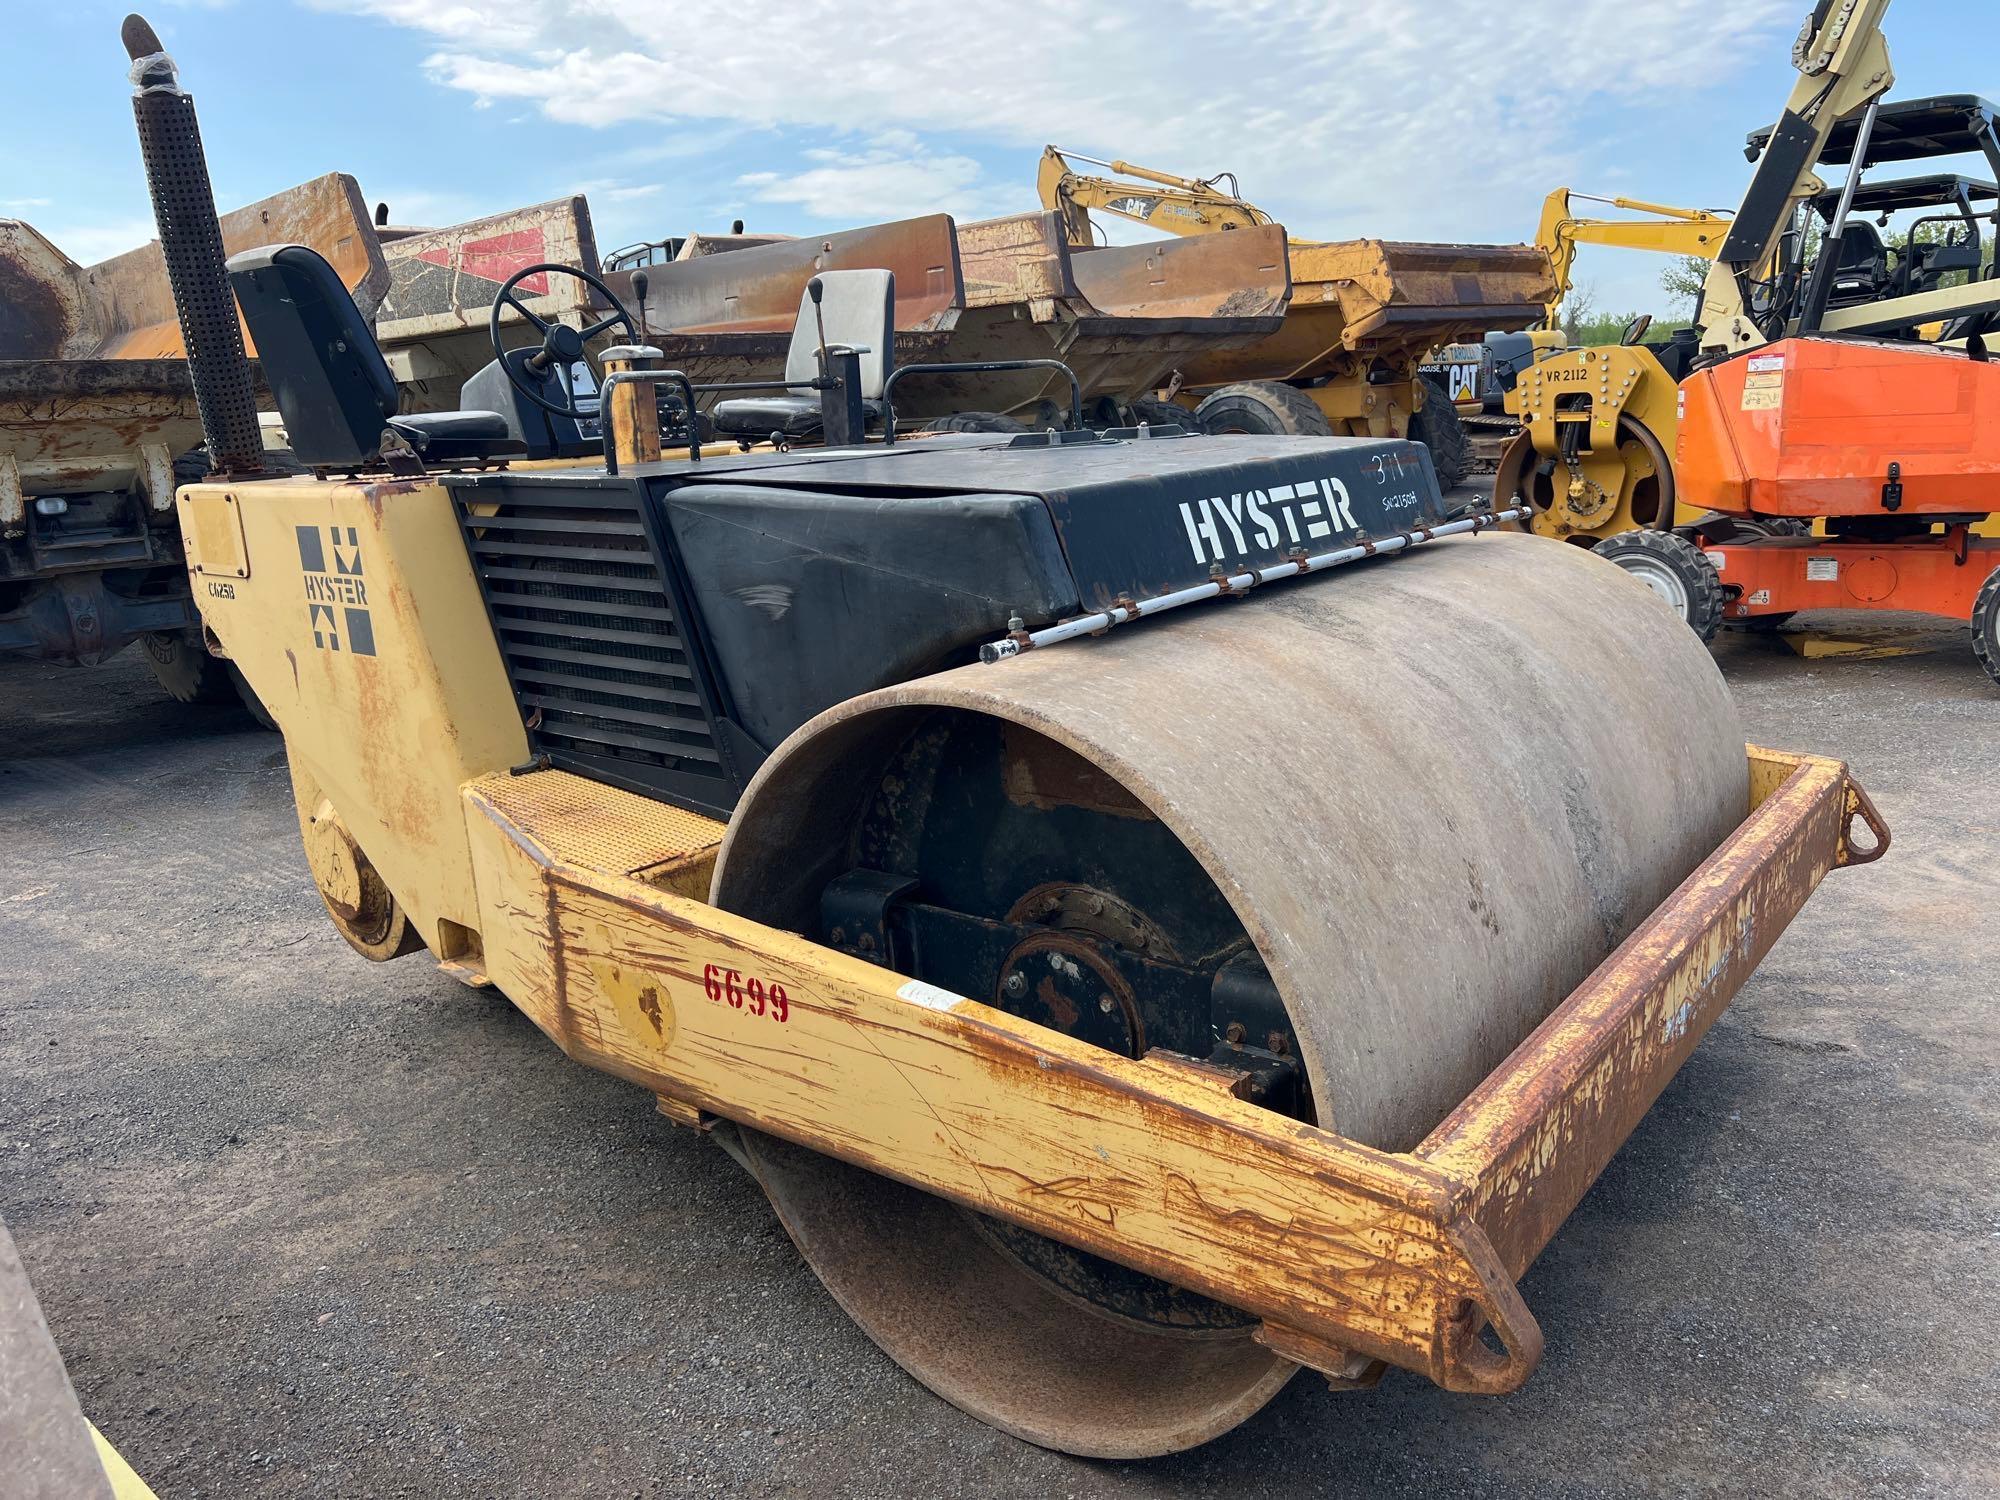 HYSTER VIBRATORY ROLLER SN:B156C2150H powered by diesel engine, equipped with OROPS, 84in. Smooth